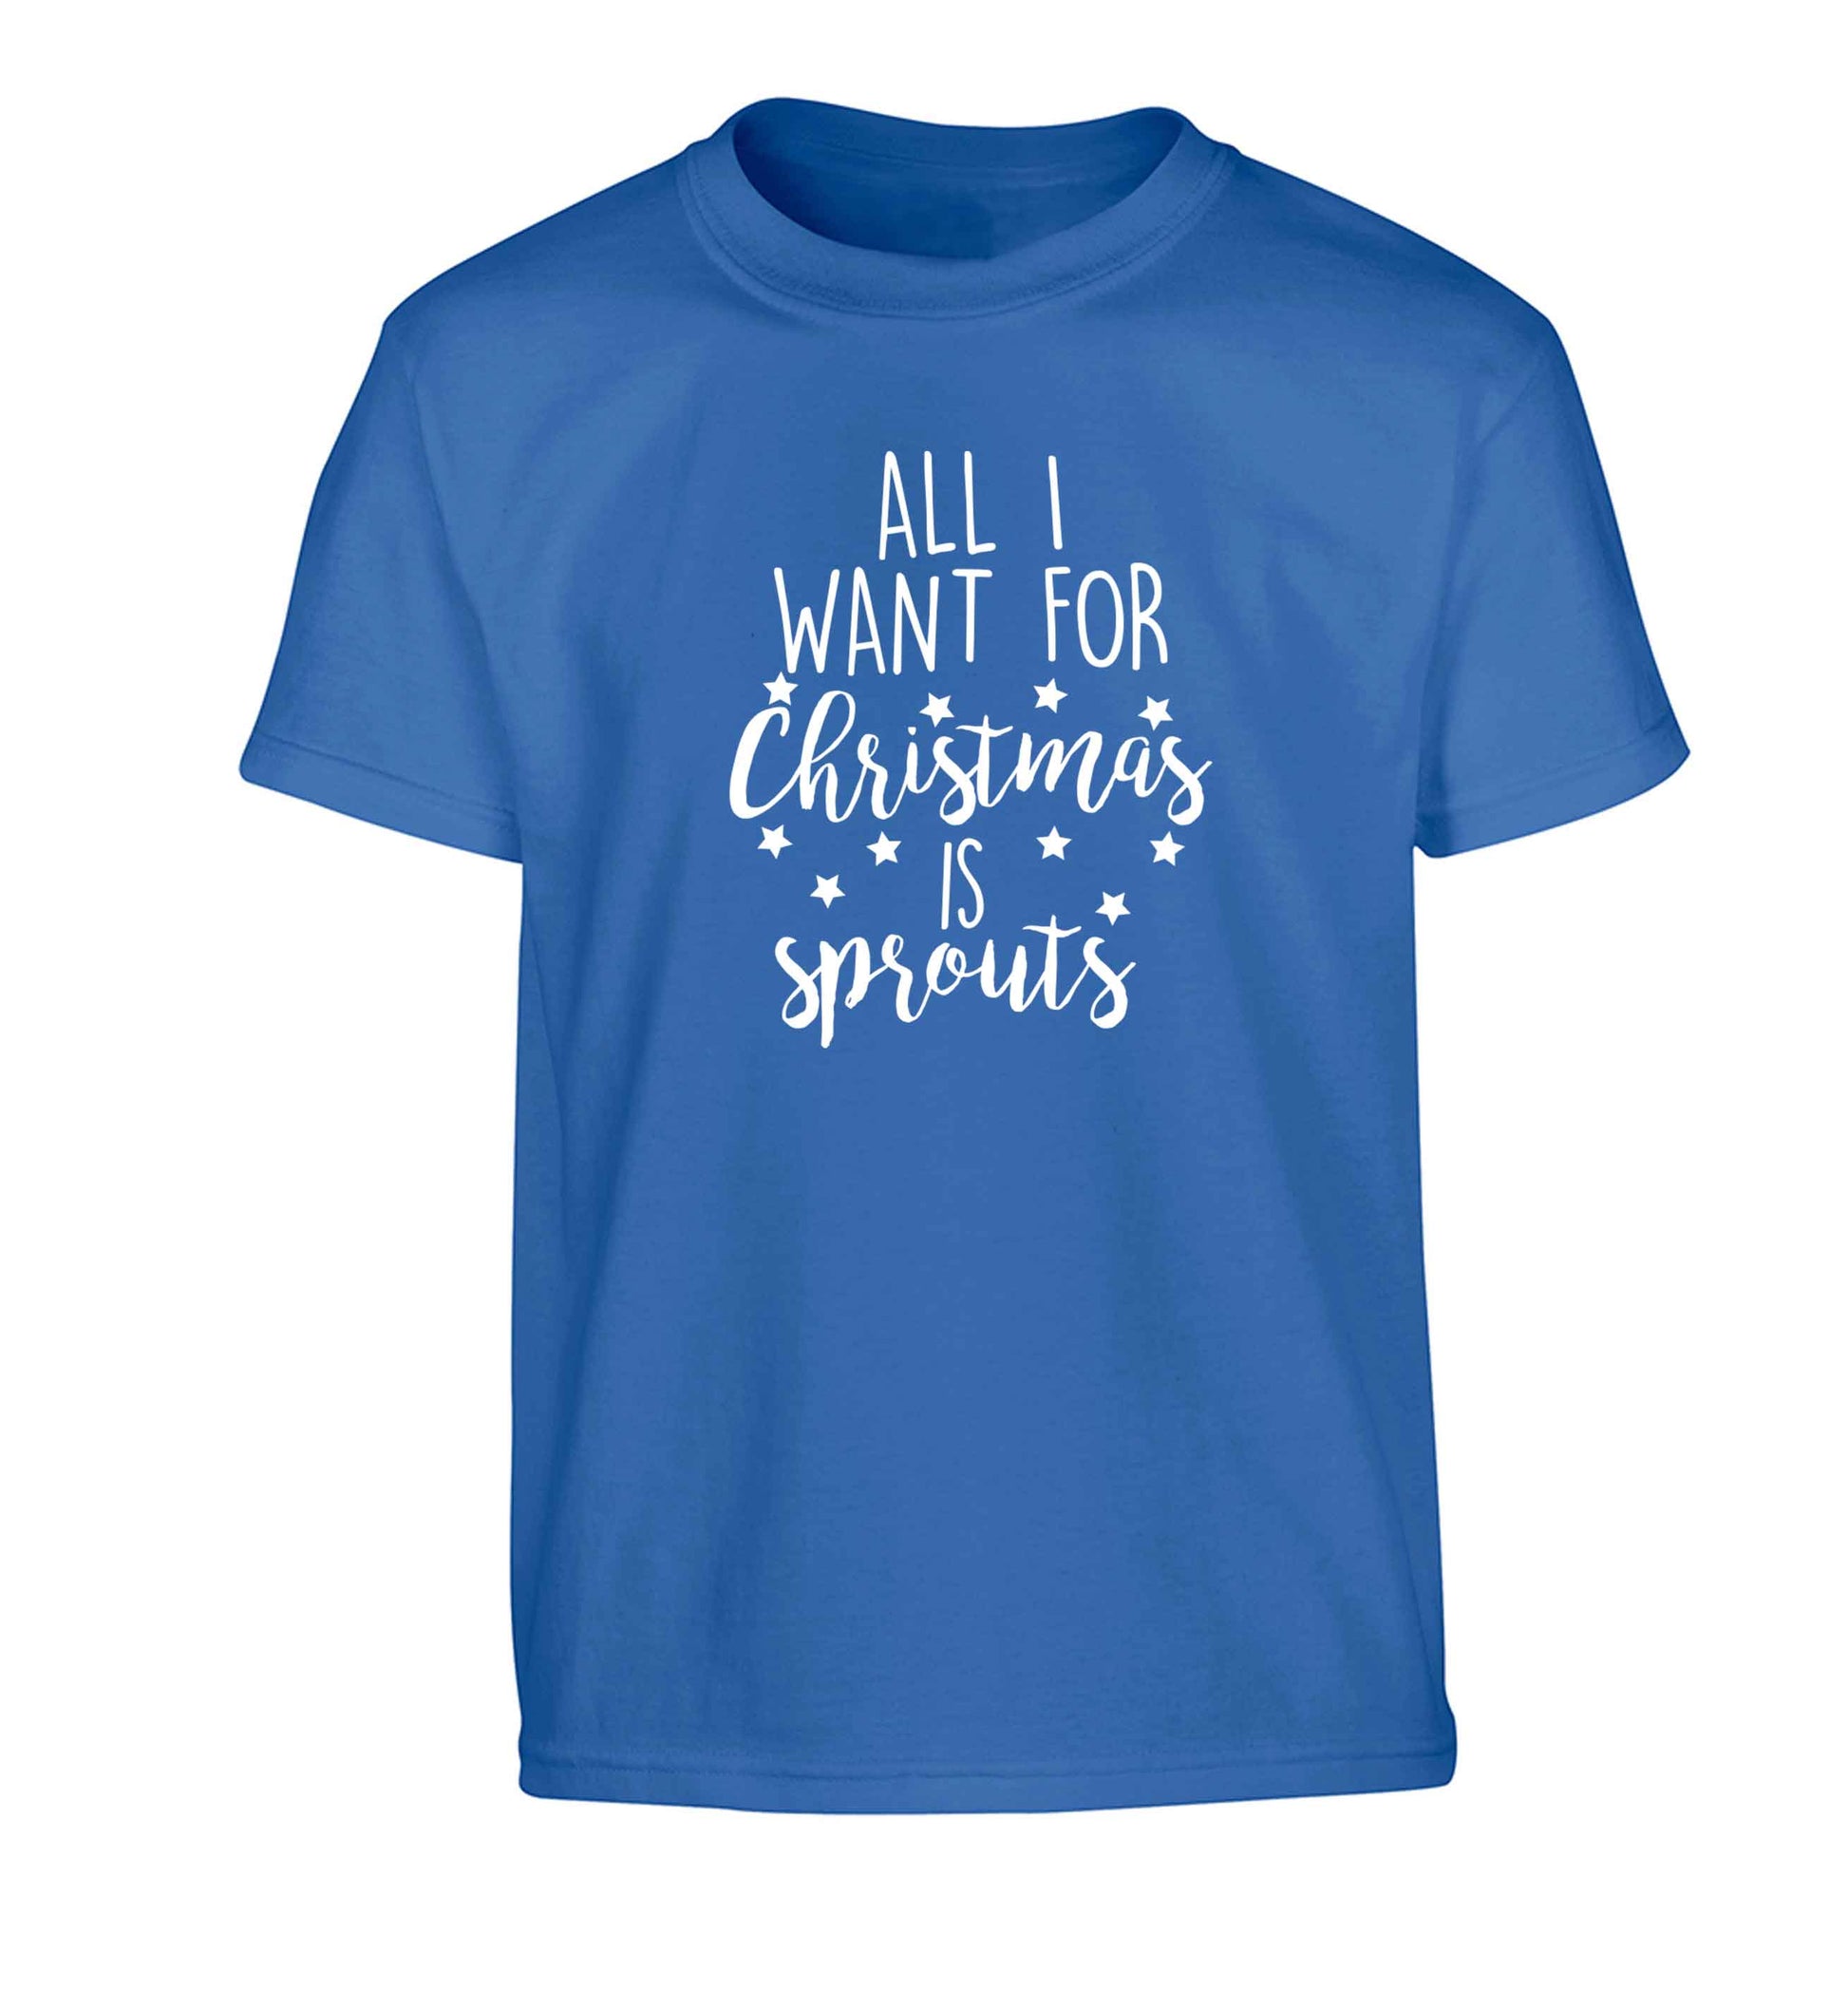 All I want for Christmas is sprouts Children's blue Tshirt 12-13 Years